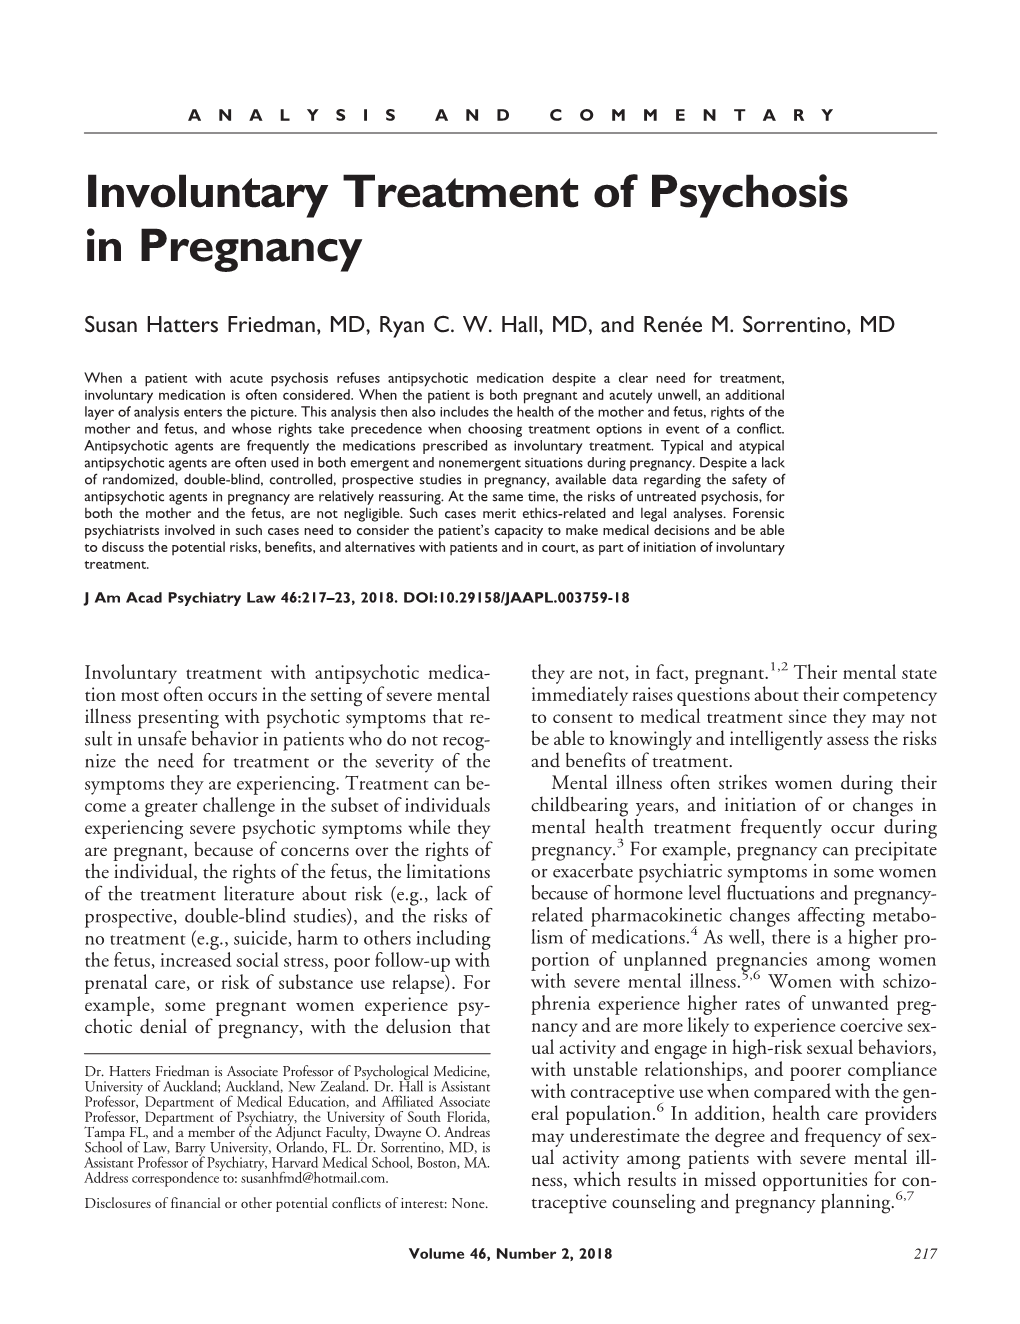 Involuntary Treatment of Psychosis in Pregnancy